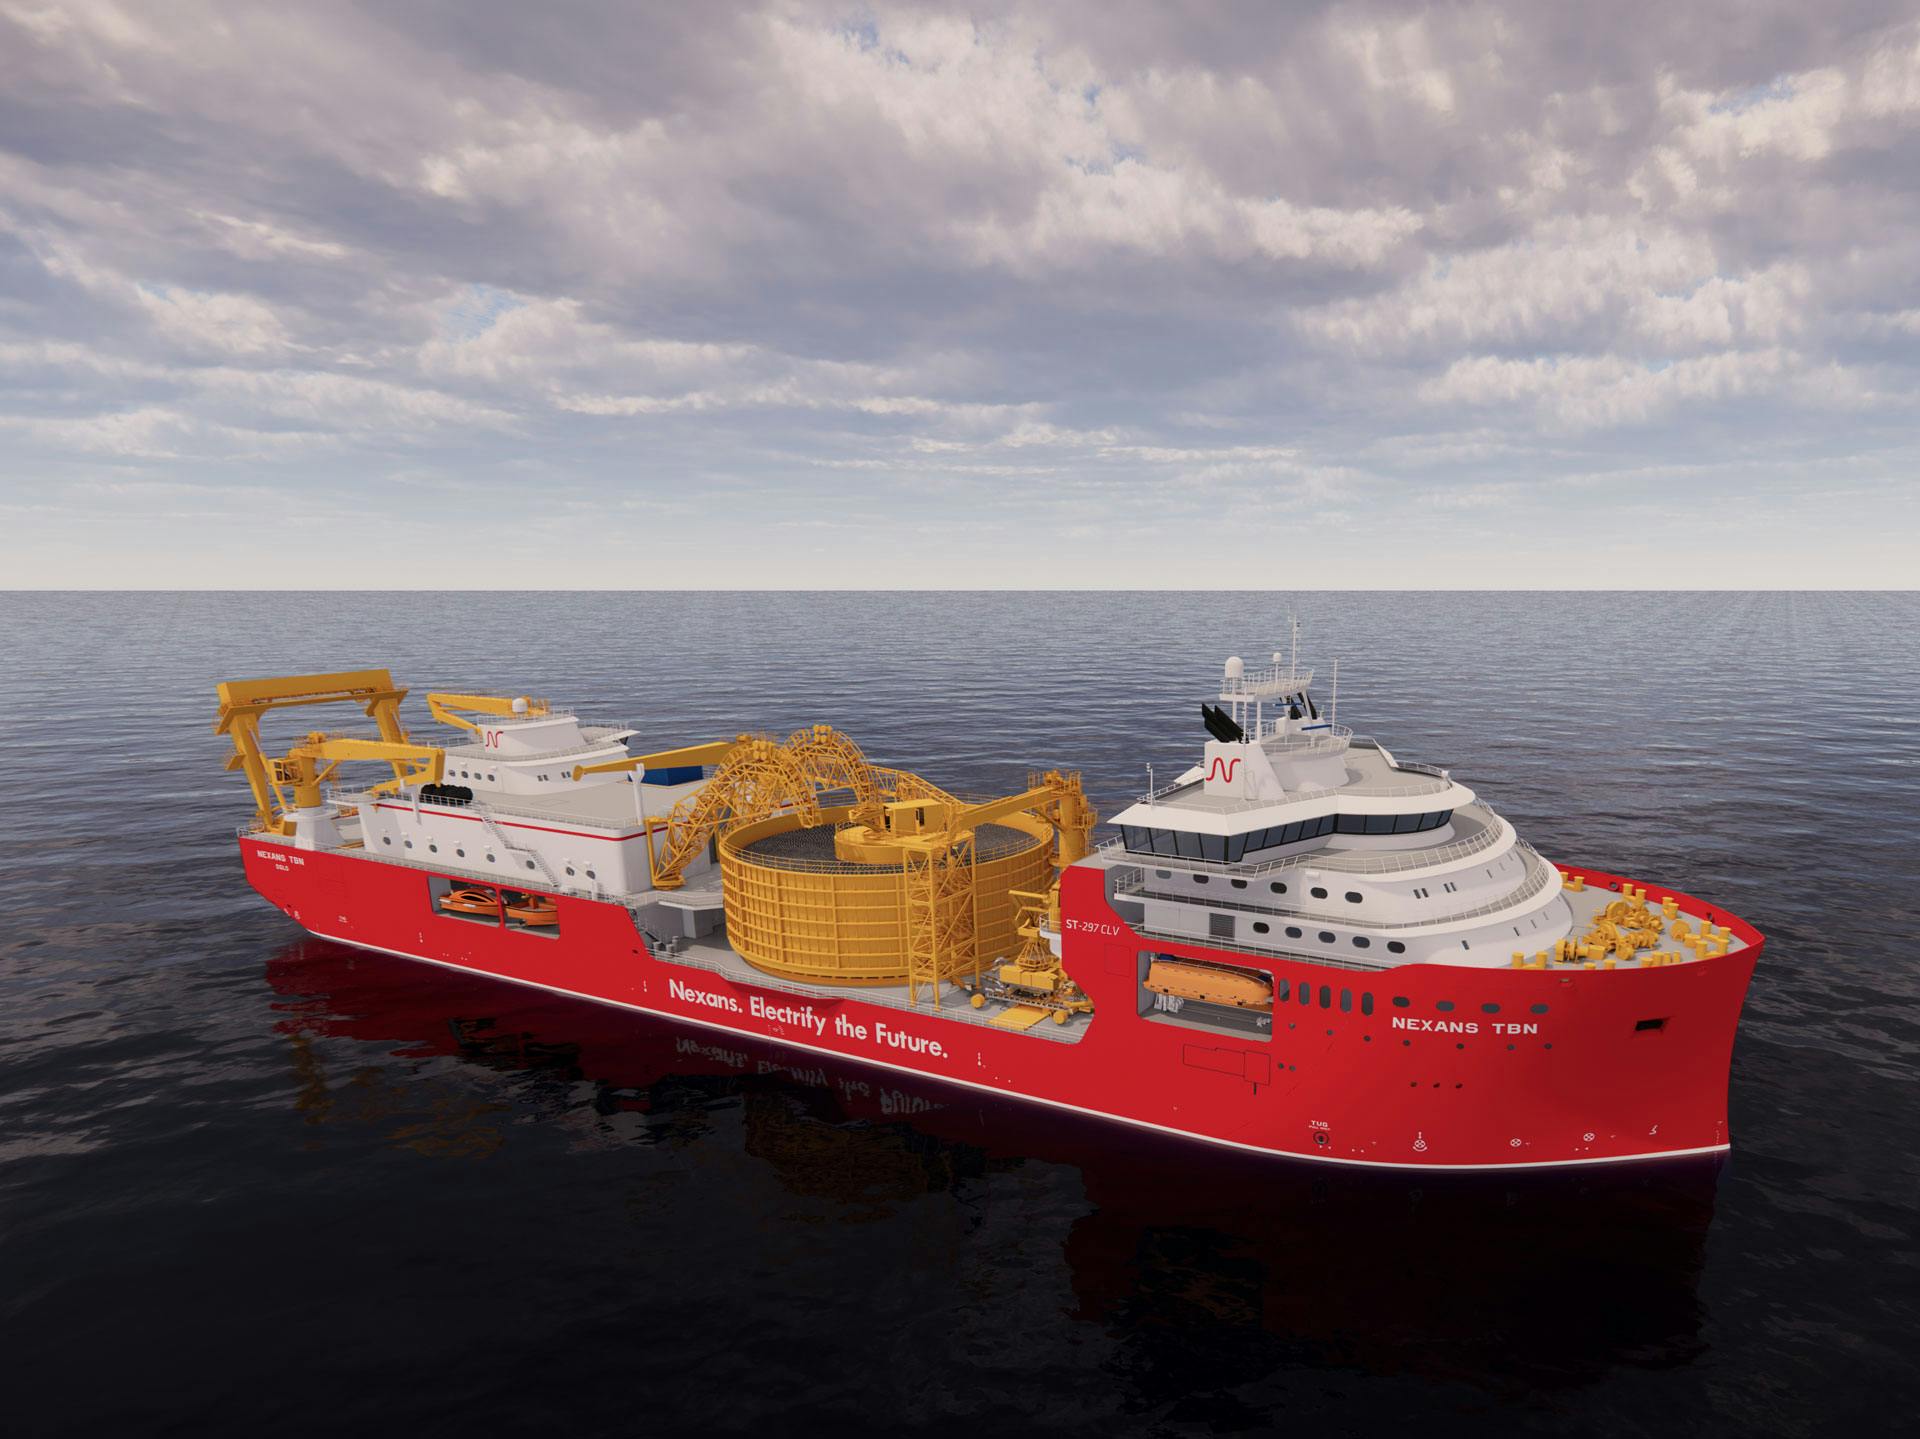 Render of a Nexans rig offshore, with horizon in the background